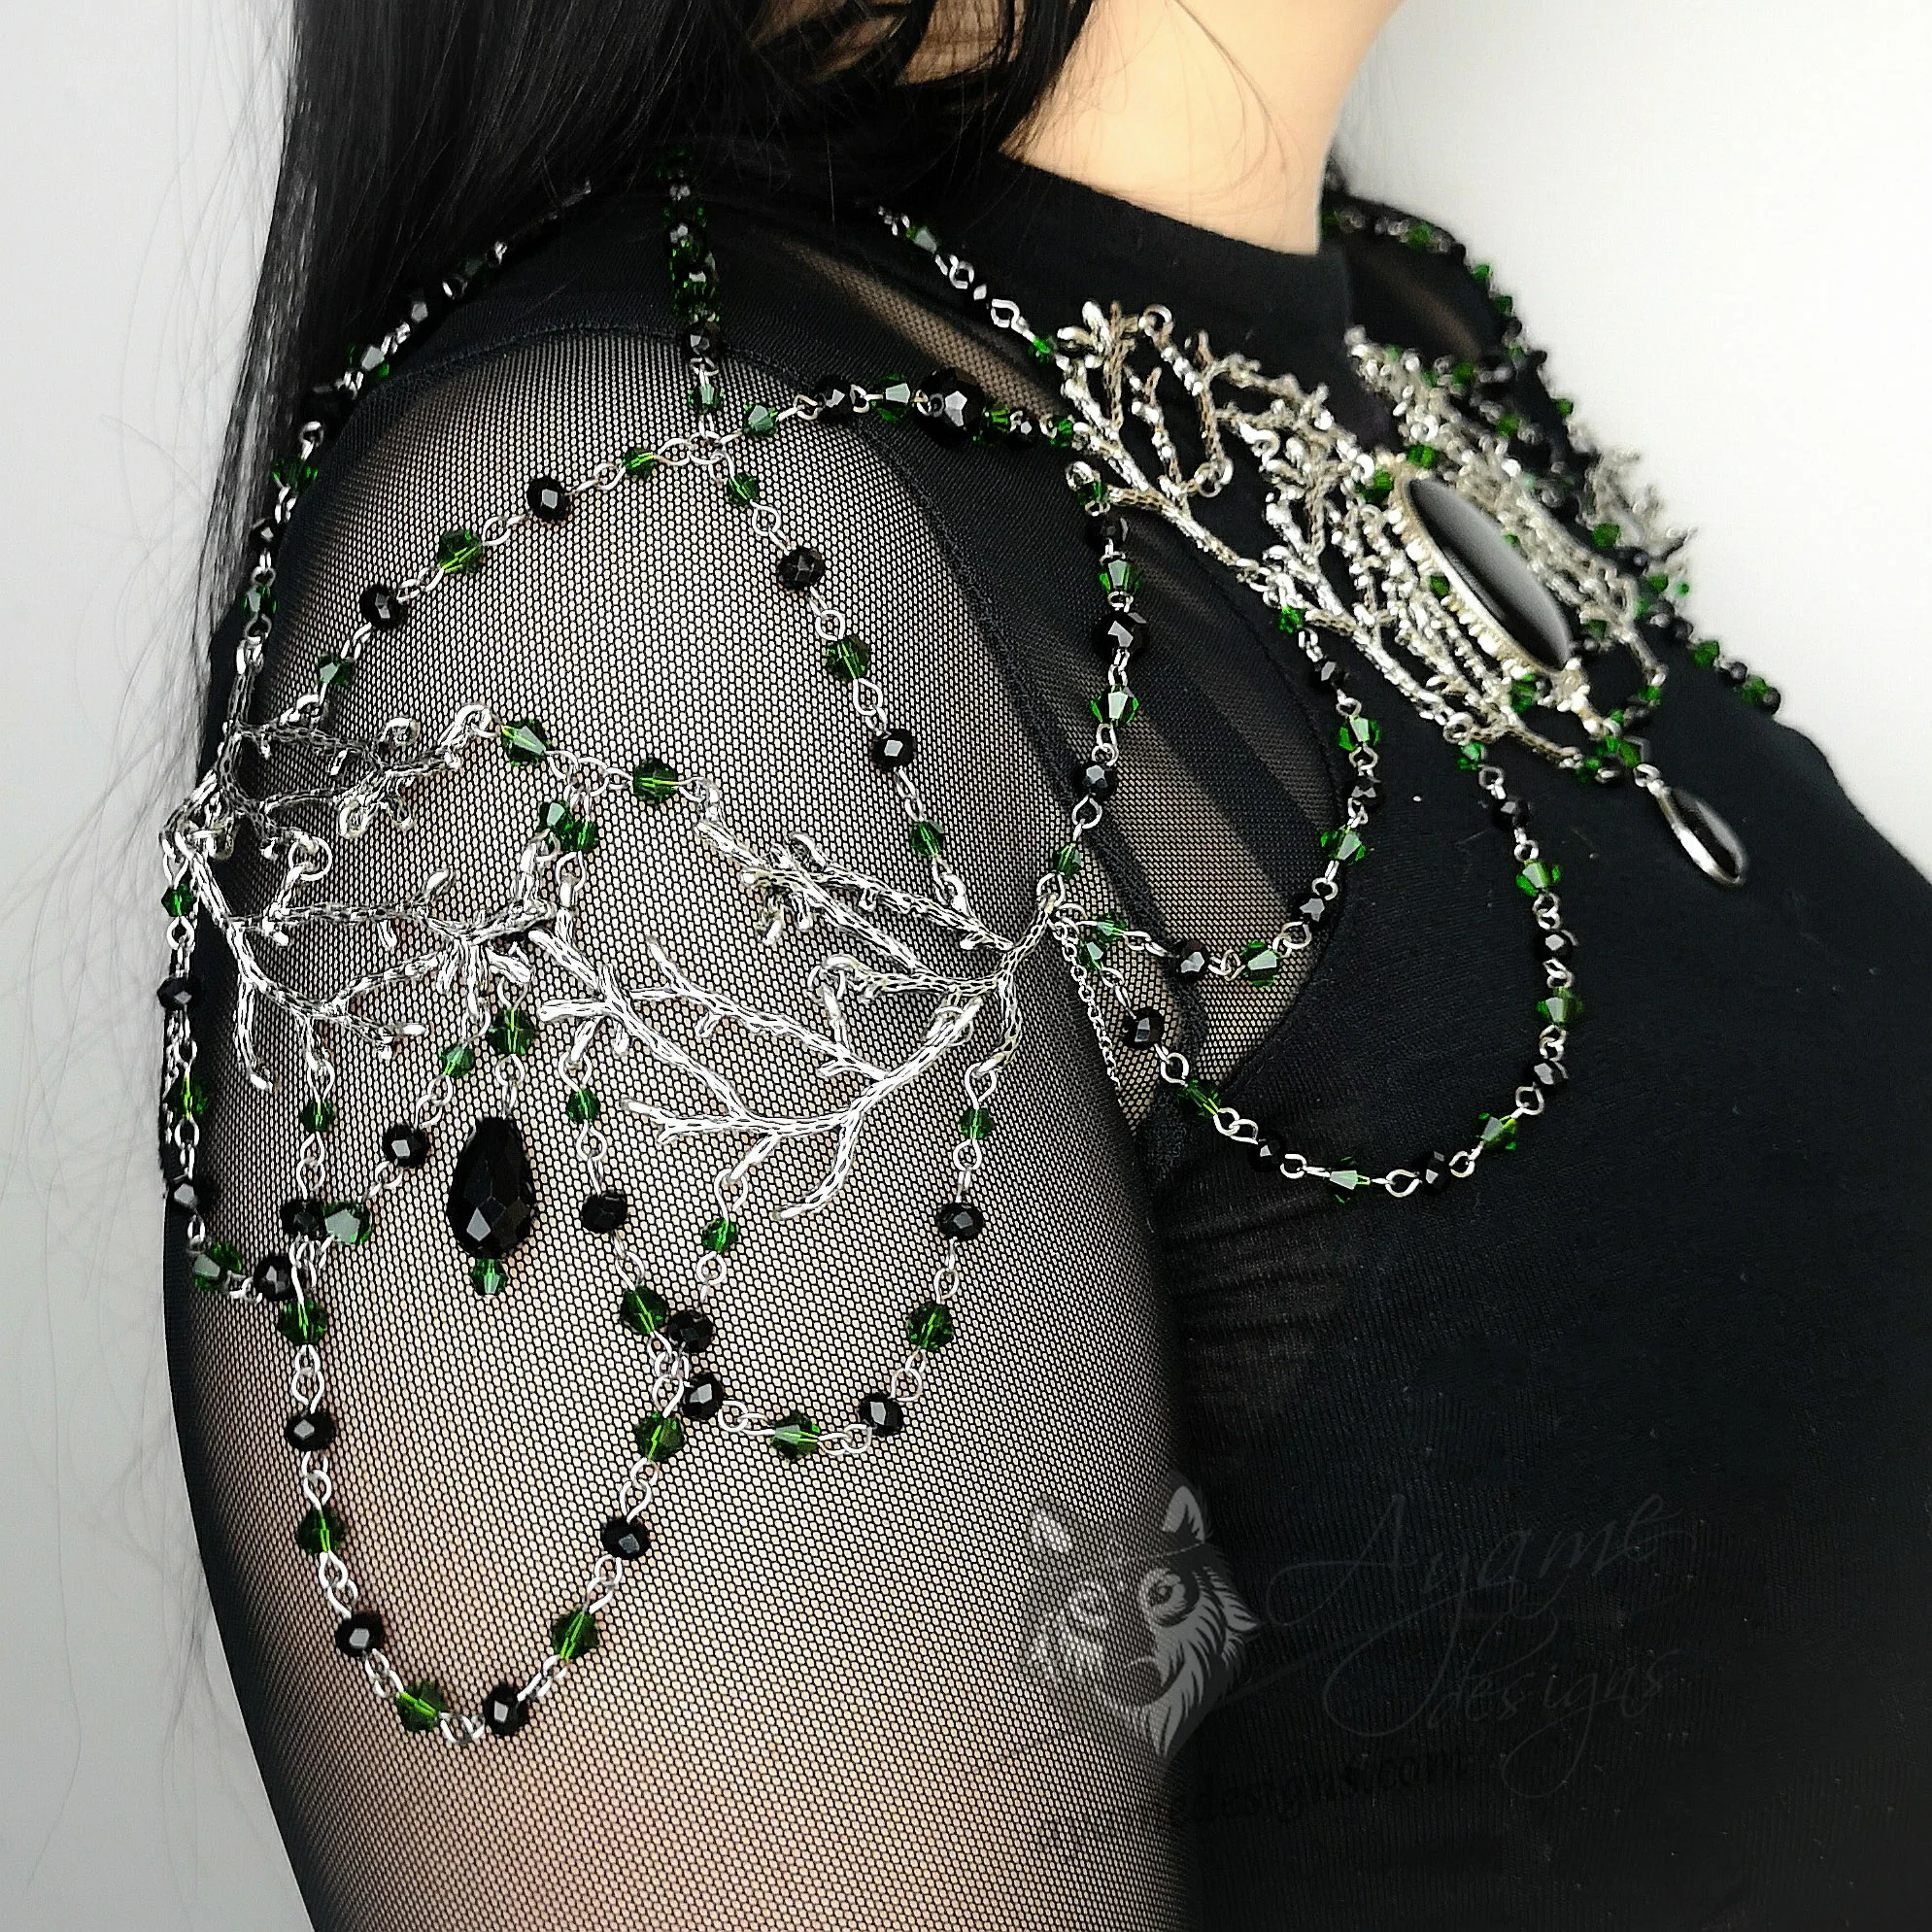 Handmade adjustable gothic bridal shoulder chain necklace with Austrian crystal beads and a resin cabochon in a filigree frame, and branch details